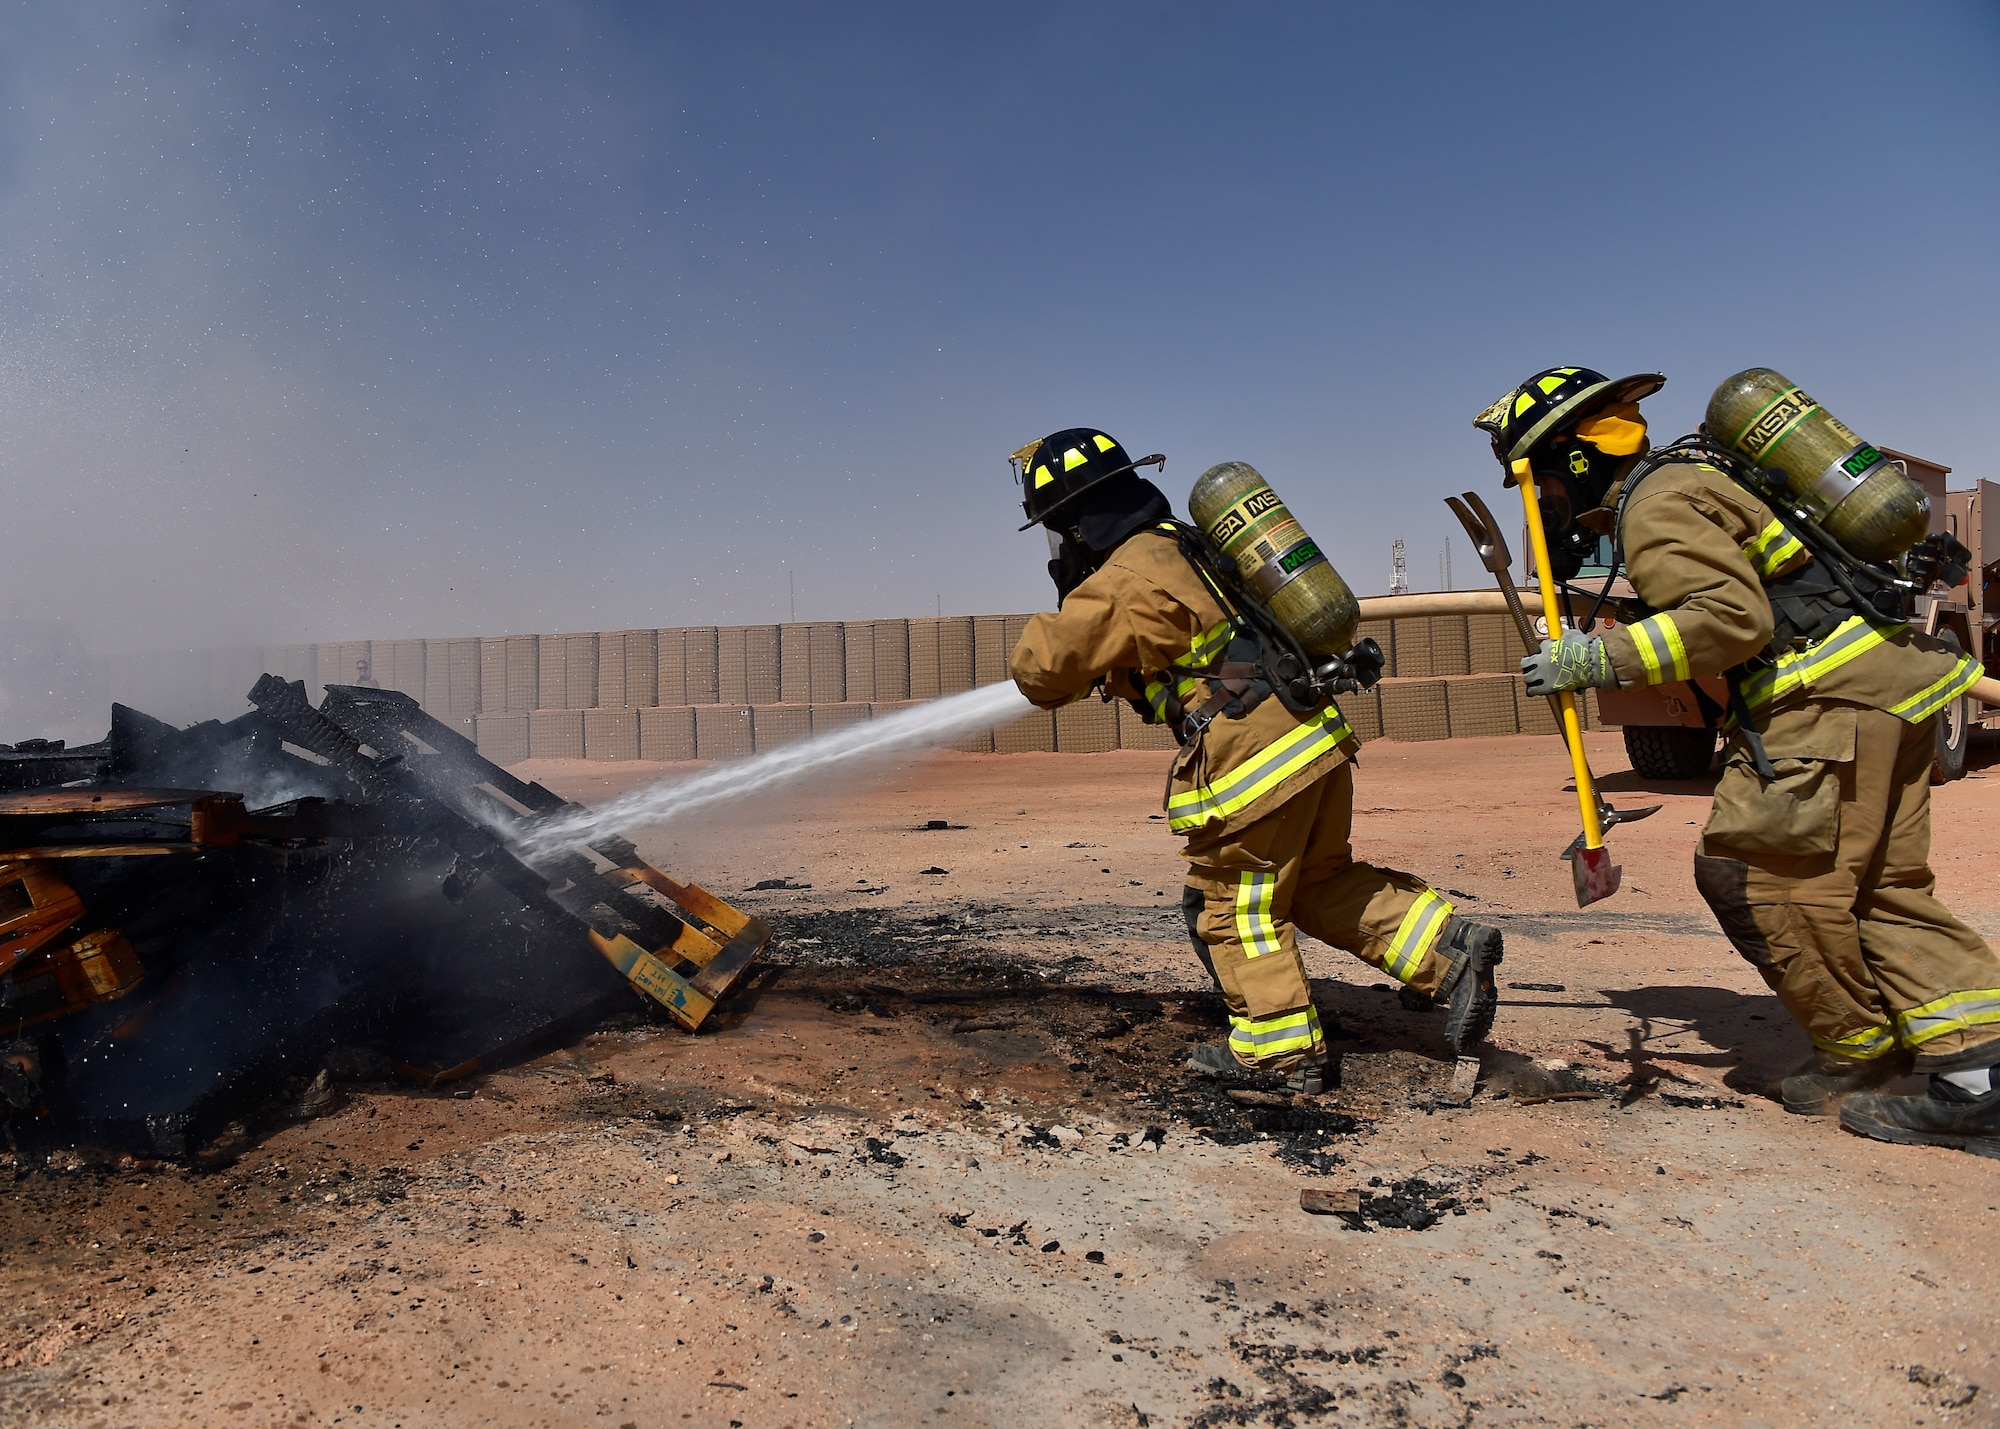 378 ECES firefighters train to save lives